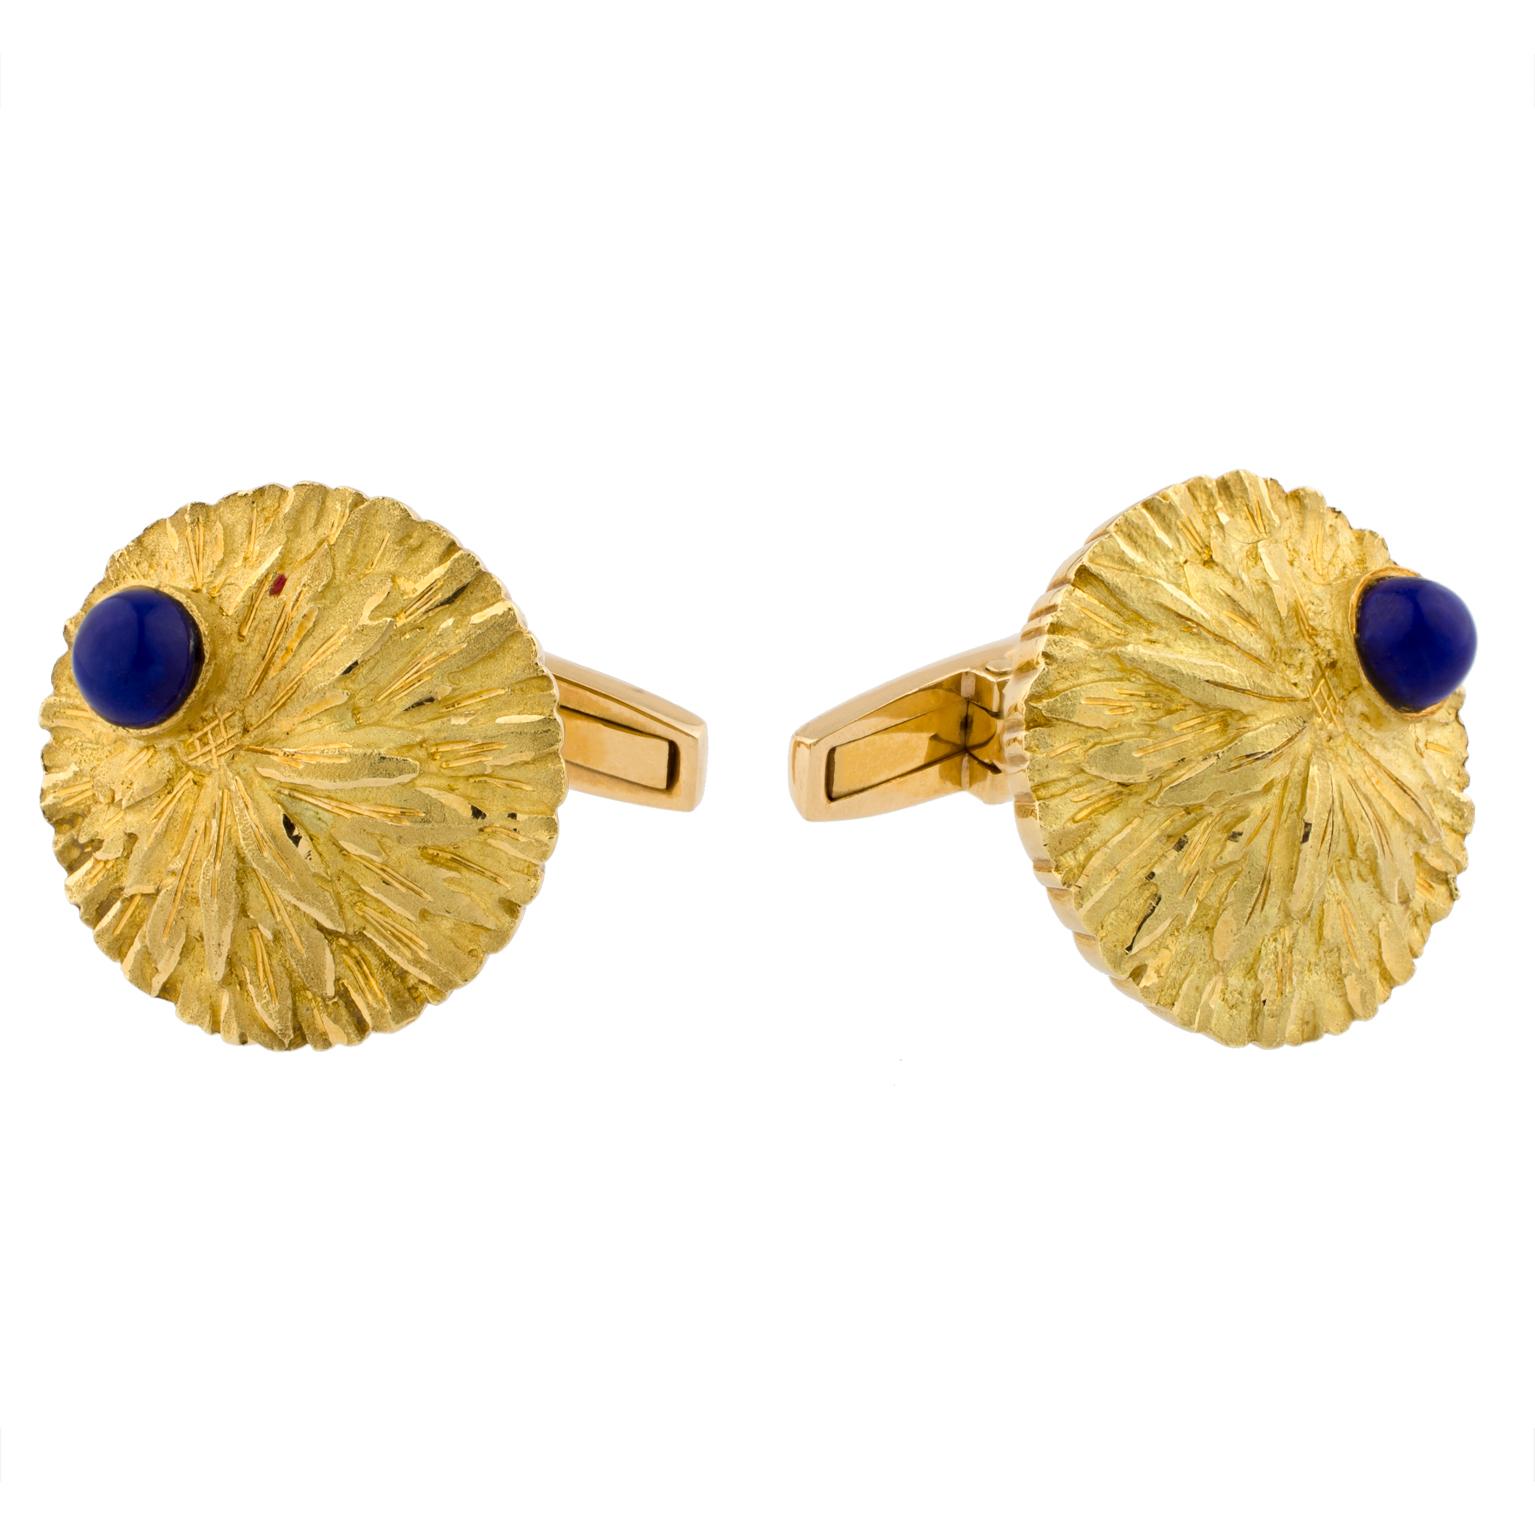 Gold and Lapis Lazuli Cufflinks For Sale